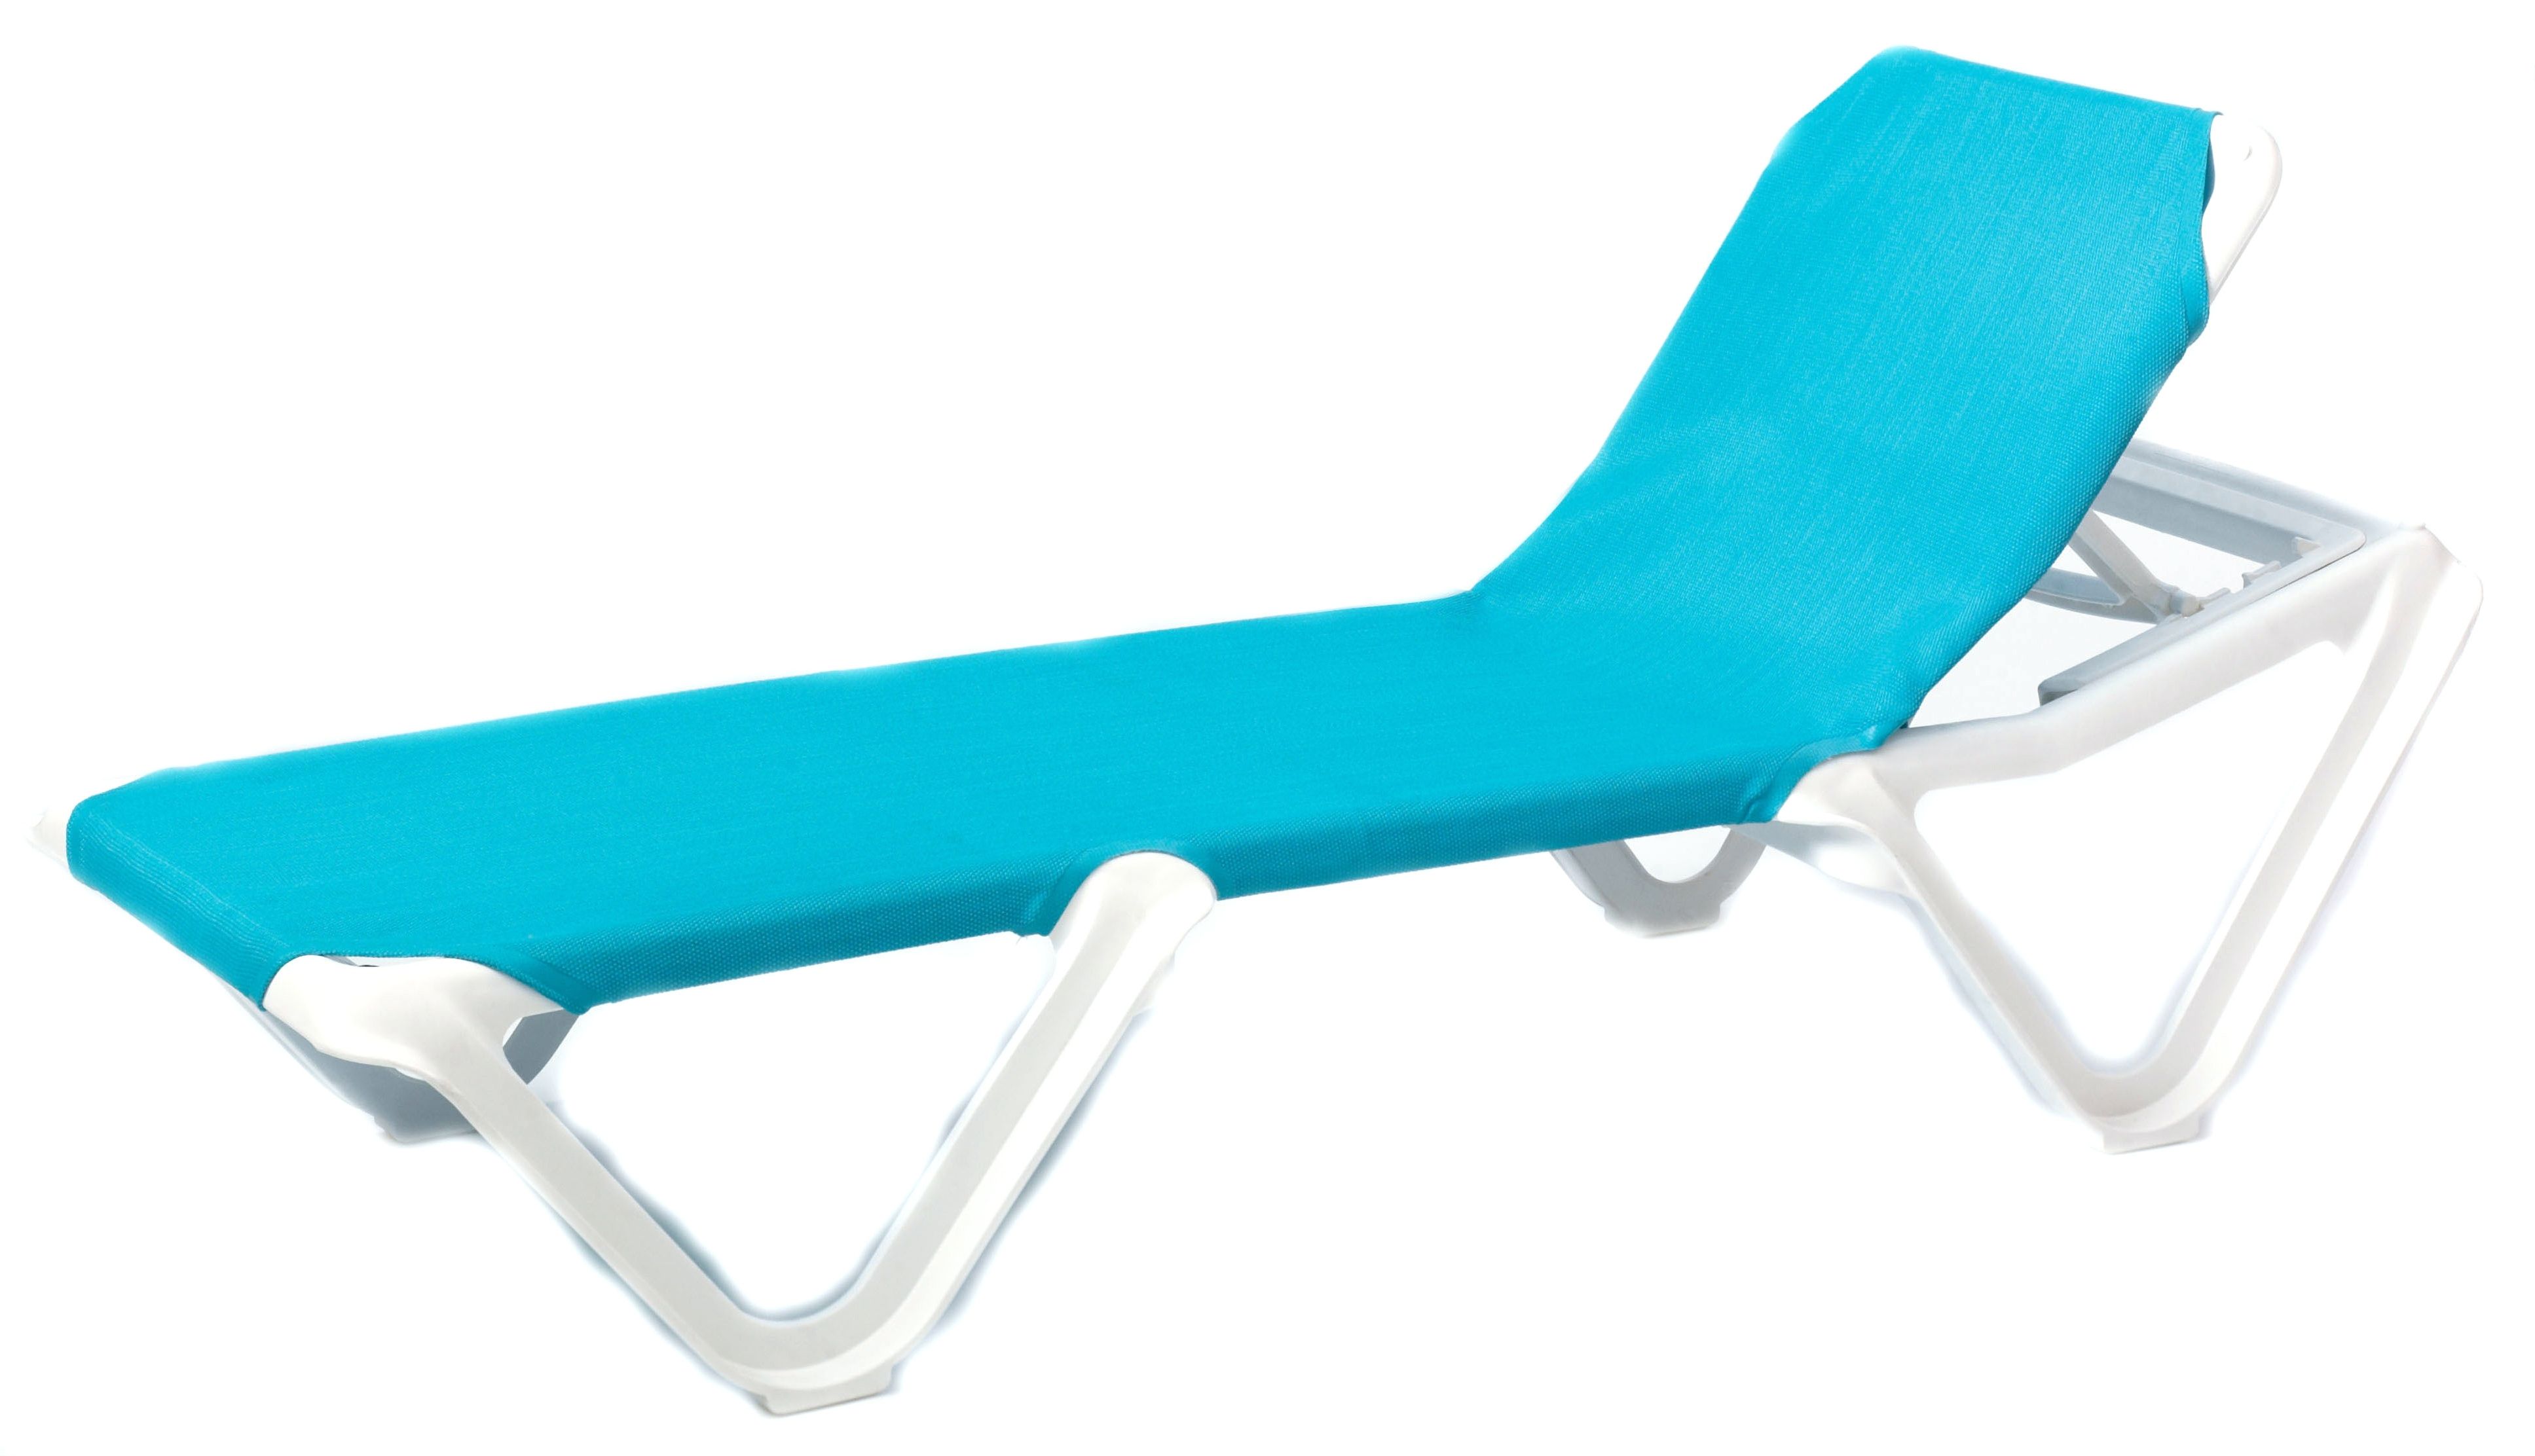 2017 Hard Plastic Chaise Lounge Chairs • Lounge Chairs Ideas Inside Commercial Grade Outdoor Chaise Lounge Chairs (View 15 of 15)